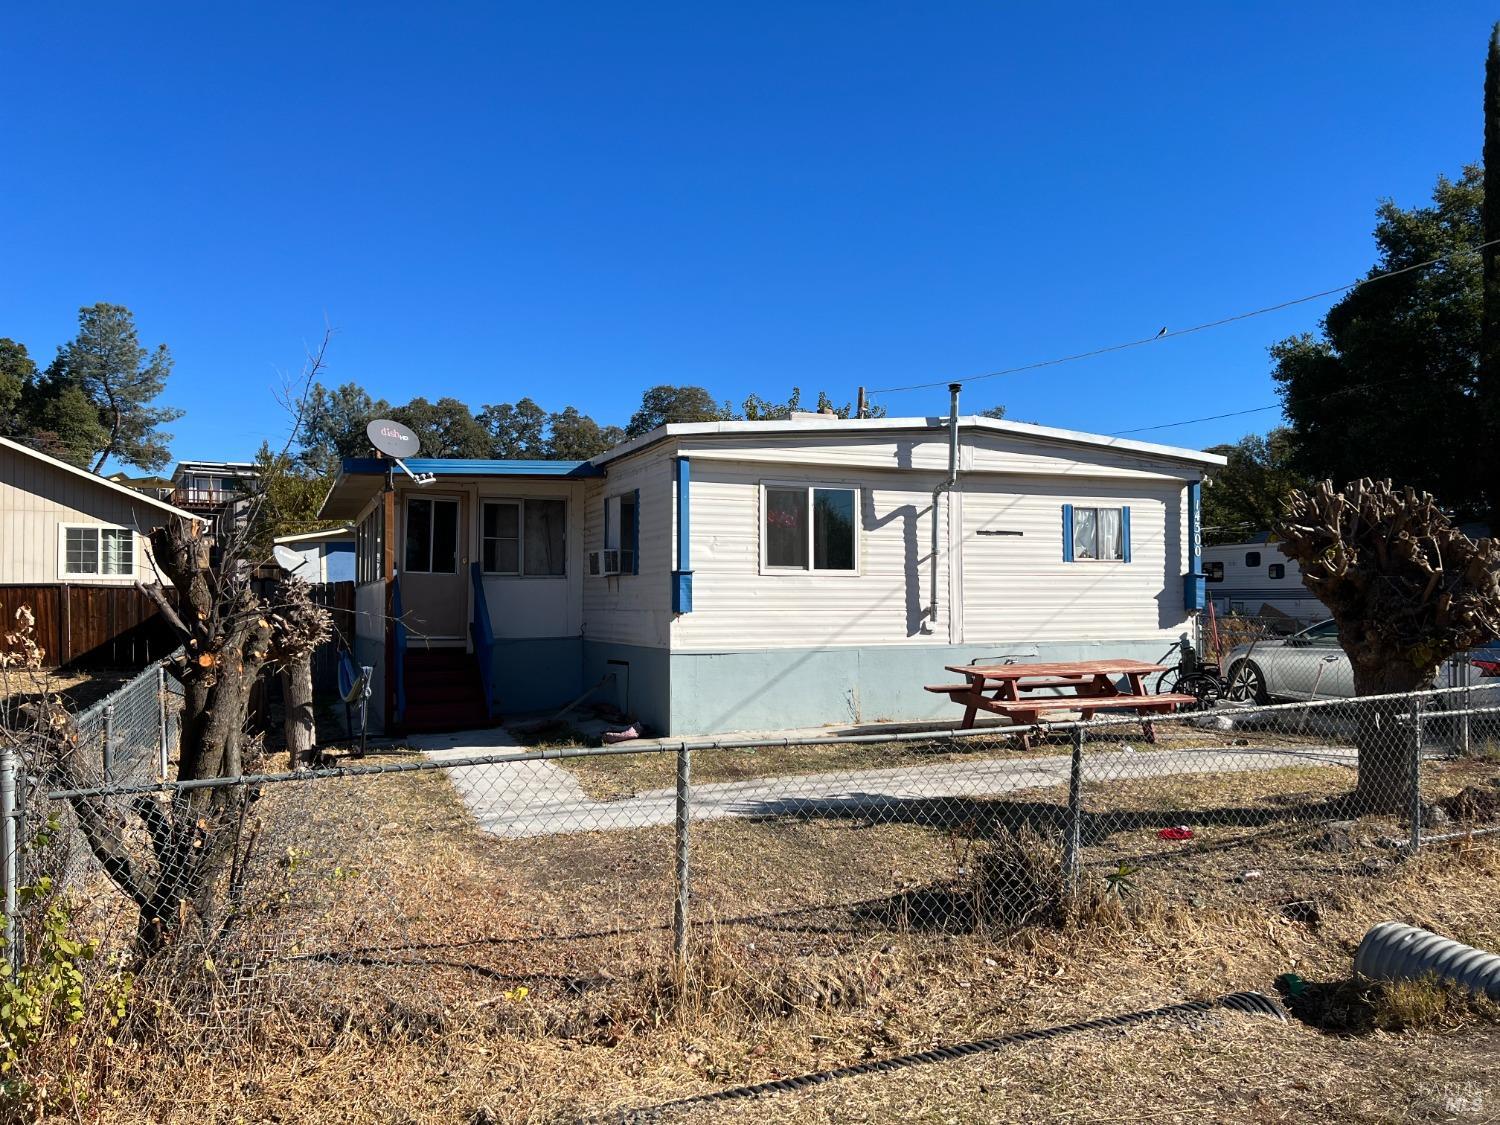 Photo of 14300 Robinson Ave in Clearlake, CA